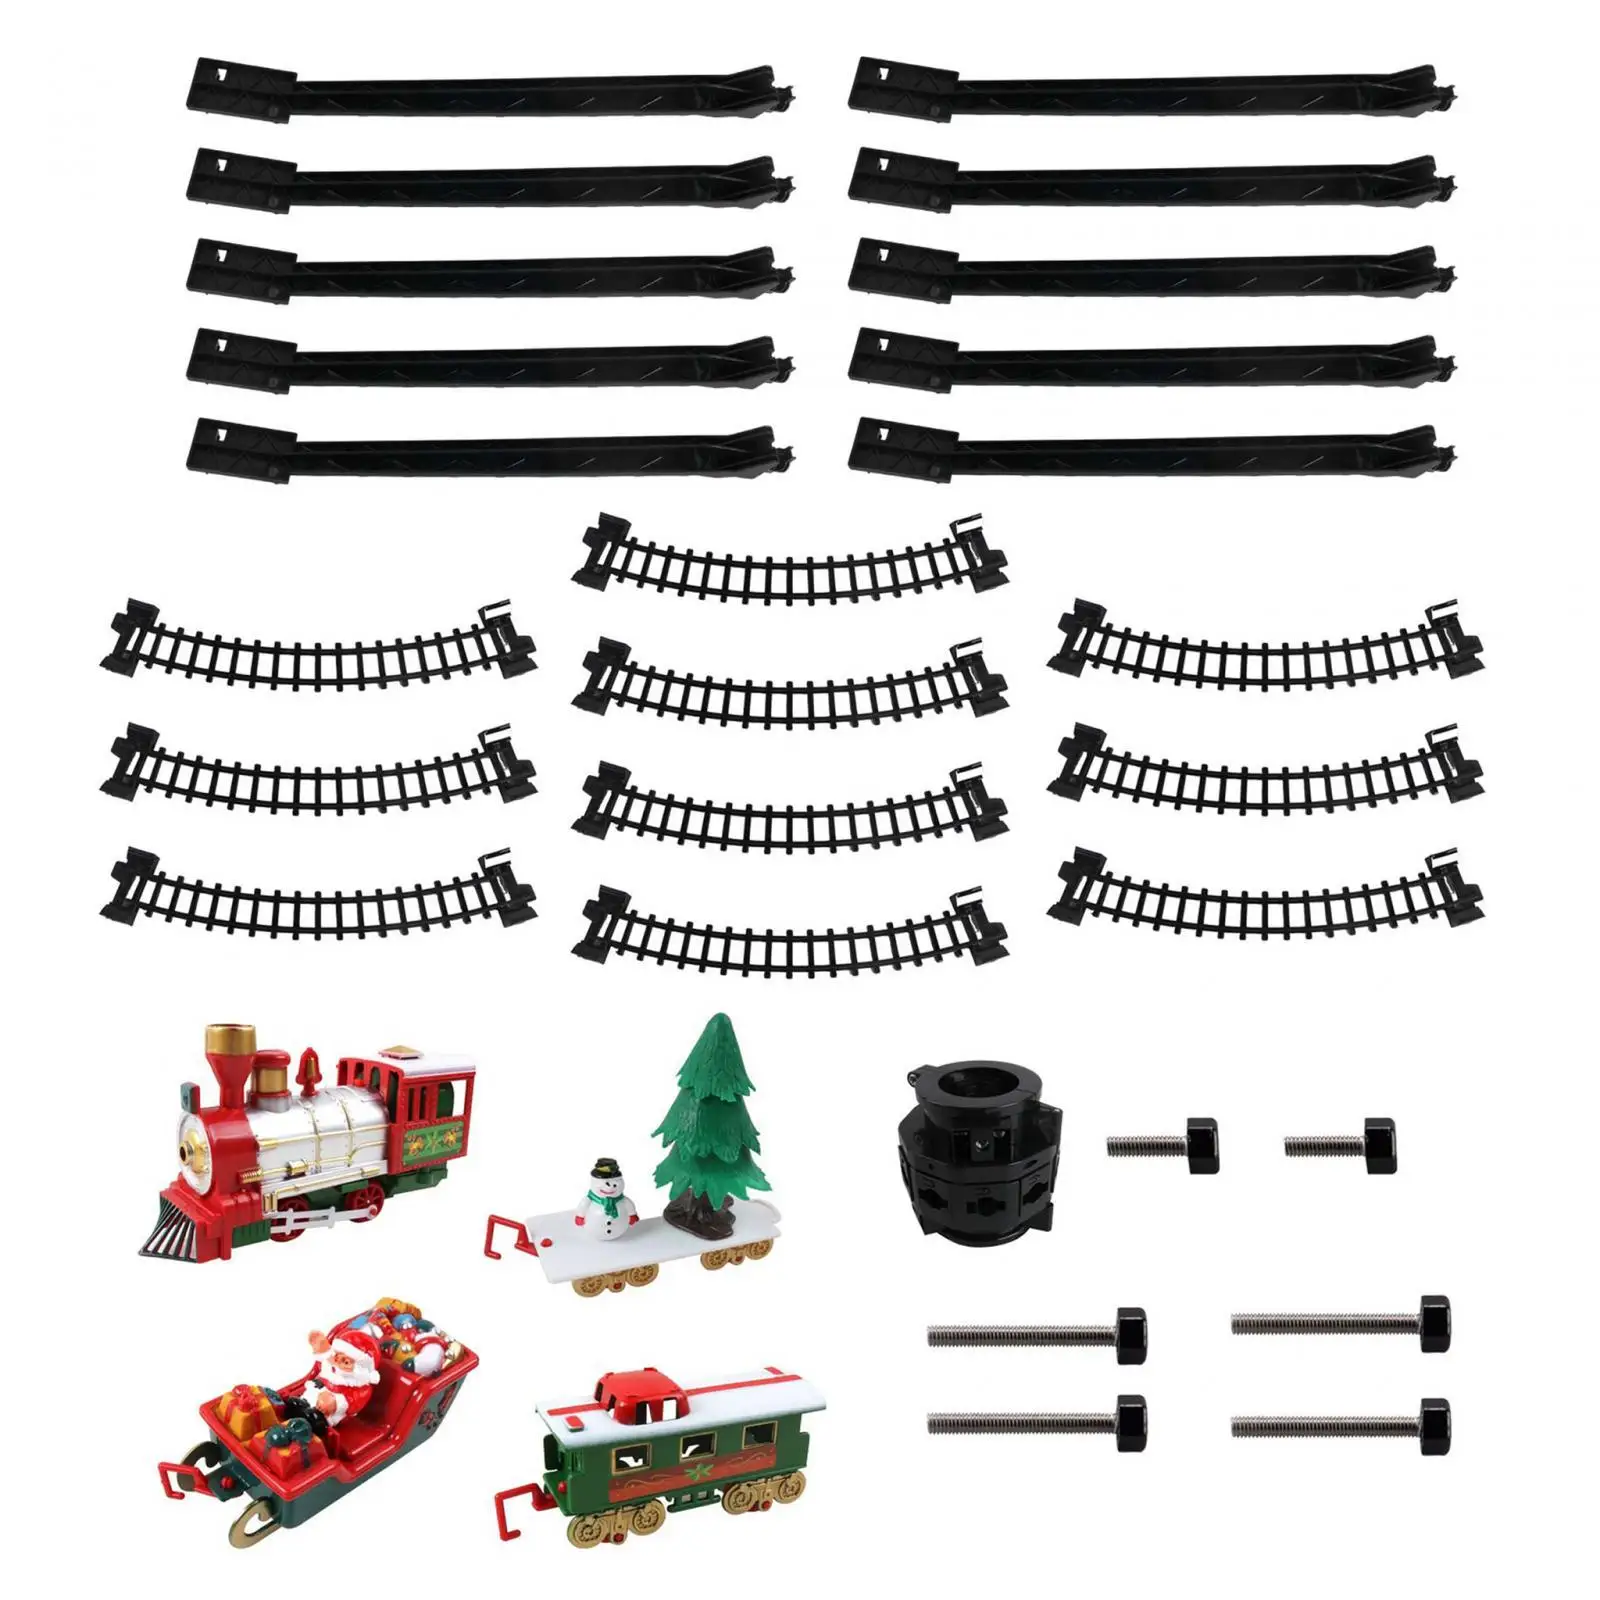 Christmas Electric Train Set Cargo Cars and 10 Tracks Railway Tracks Set Assemble Train Toy Gifts for Kids Boys Girls Children